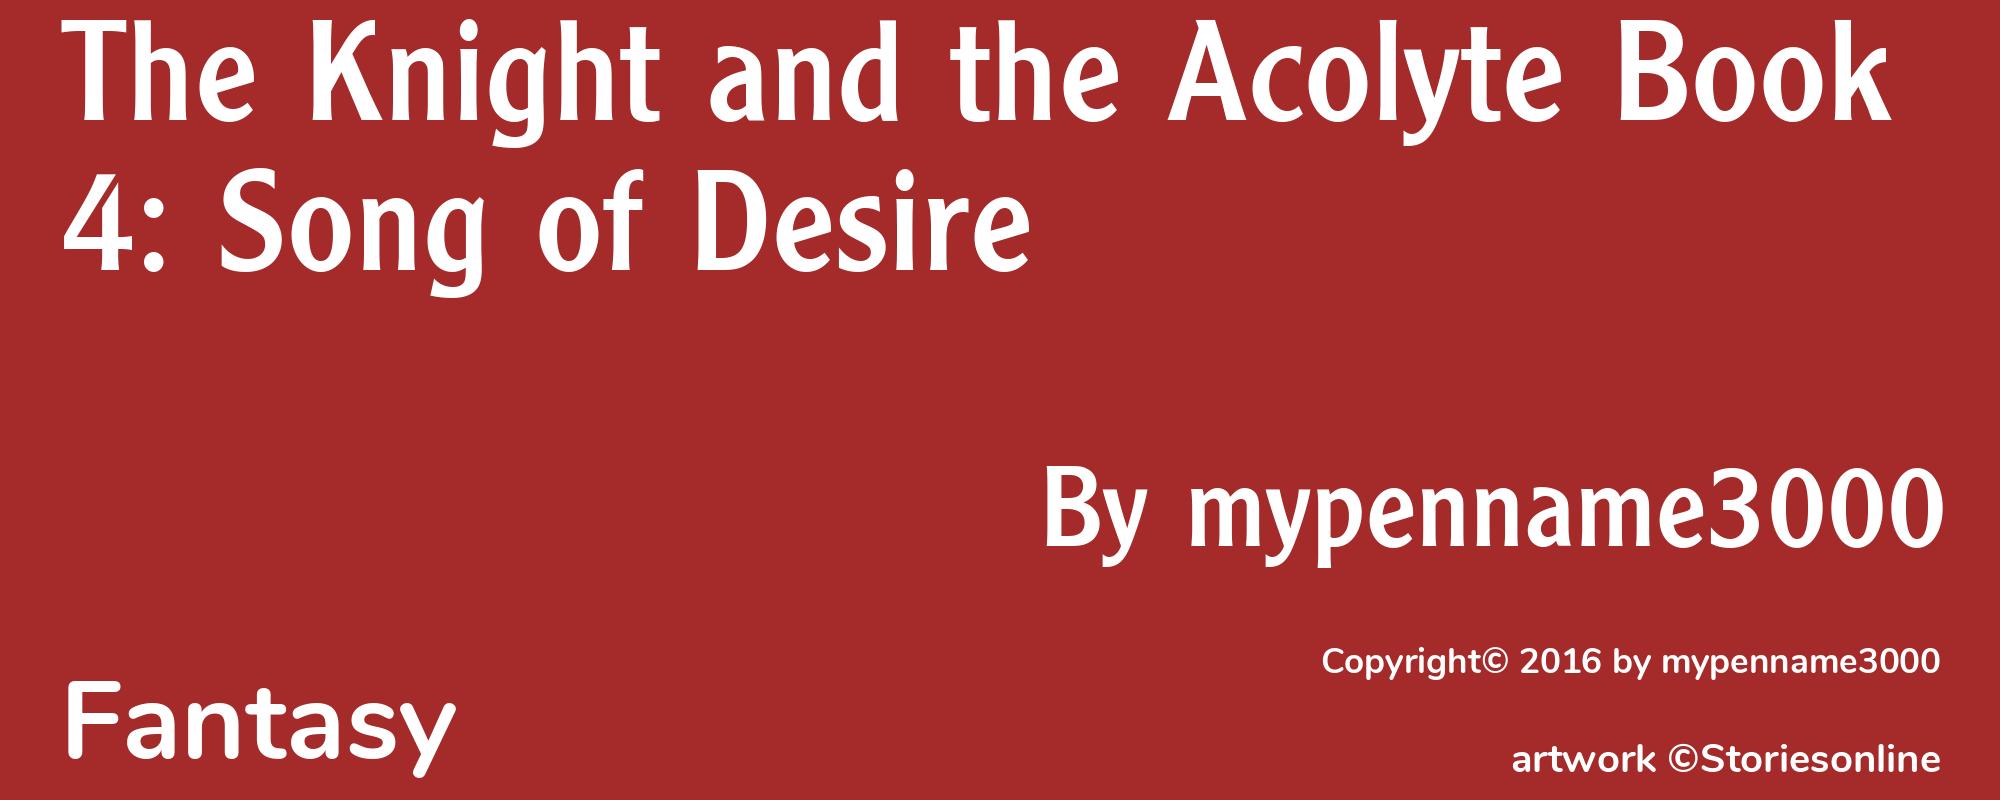 The Knight and the Acolyte Book 4: Song of Desire - Cover